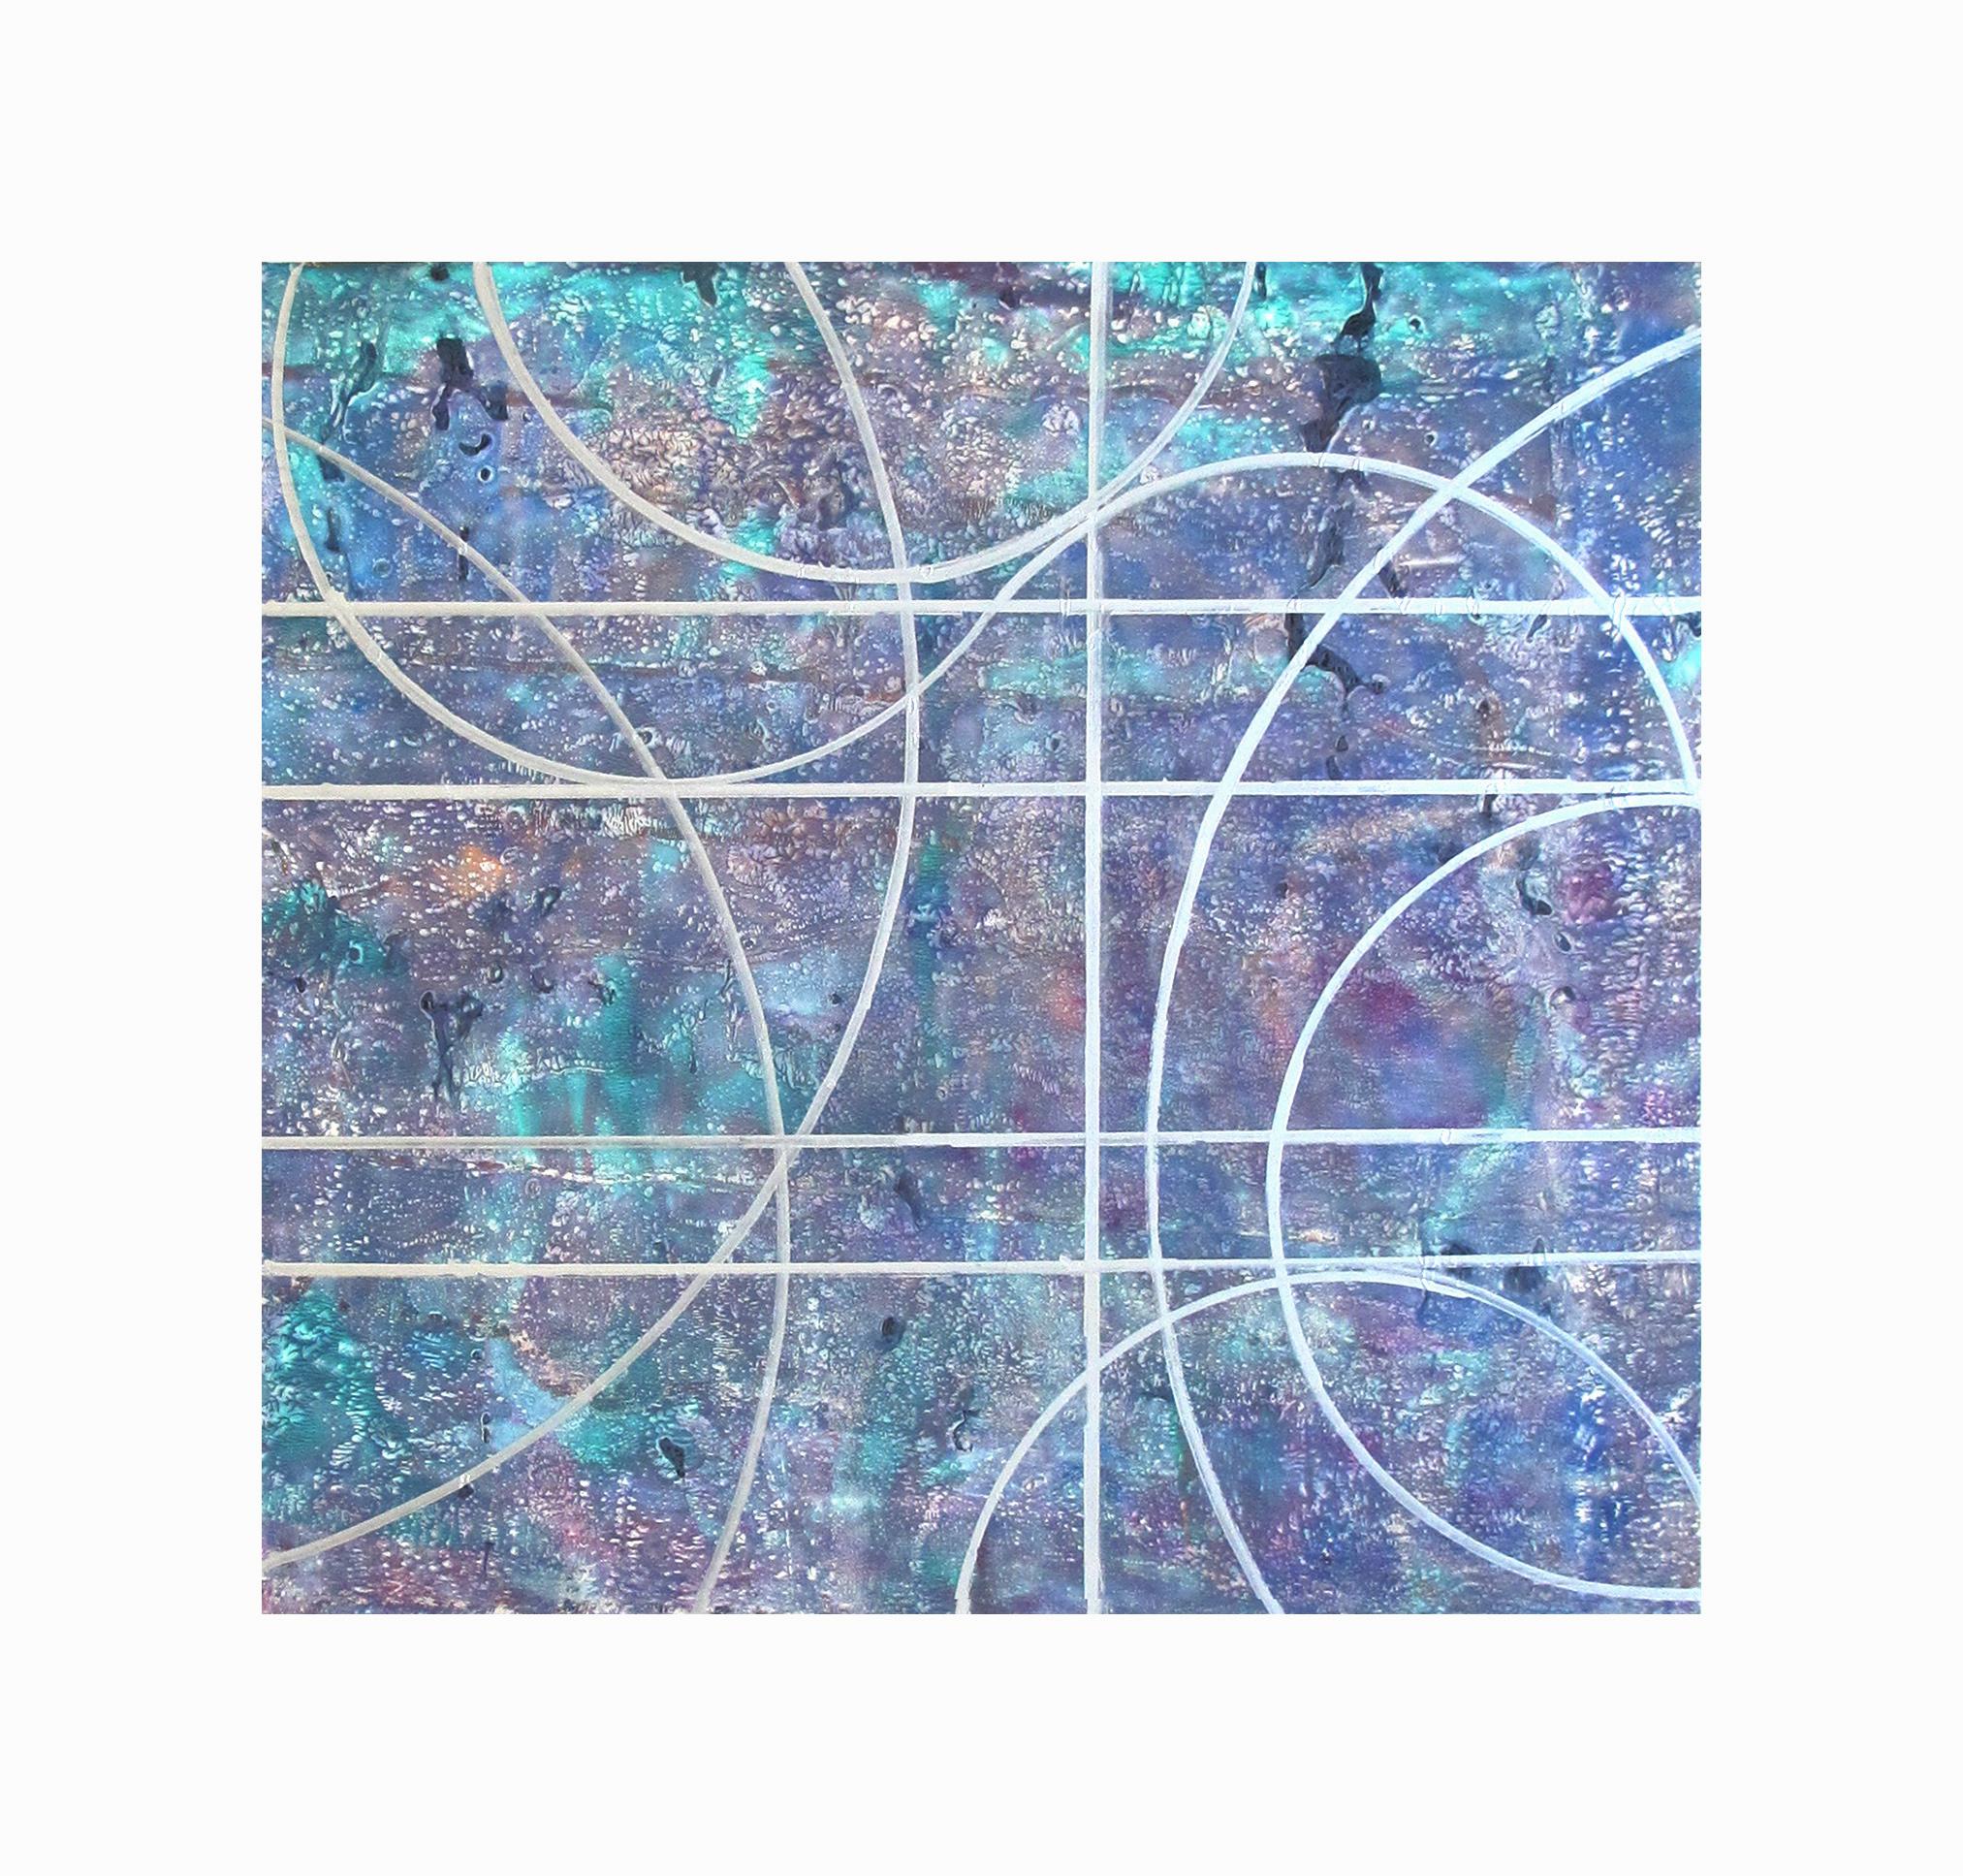 Gudrun Mertes-Frady
FORGET ME NOTS, 2019
Acrylic, oil and metallic media on Dura-Lar
16 x 17 in.

This original abstract painting by Gudrun Mertes-Frady is small but vibrant, with bright shades of purple and turquoise embellished by metallic media